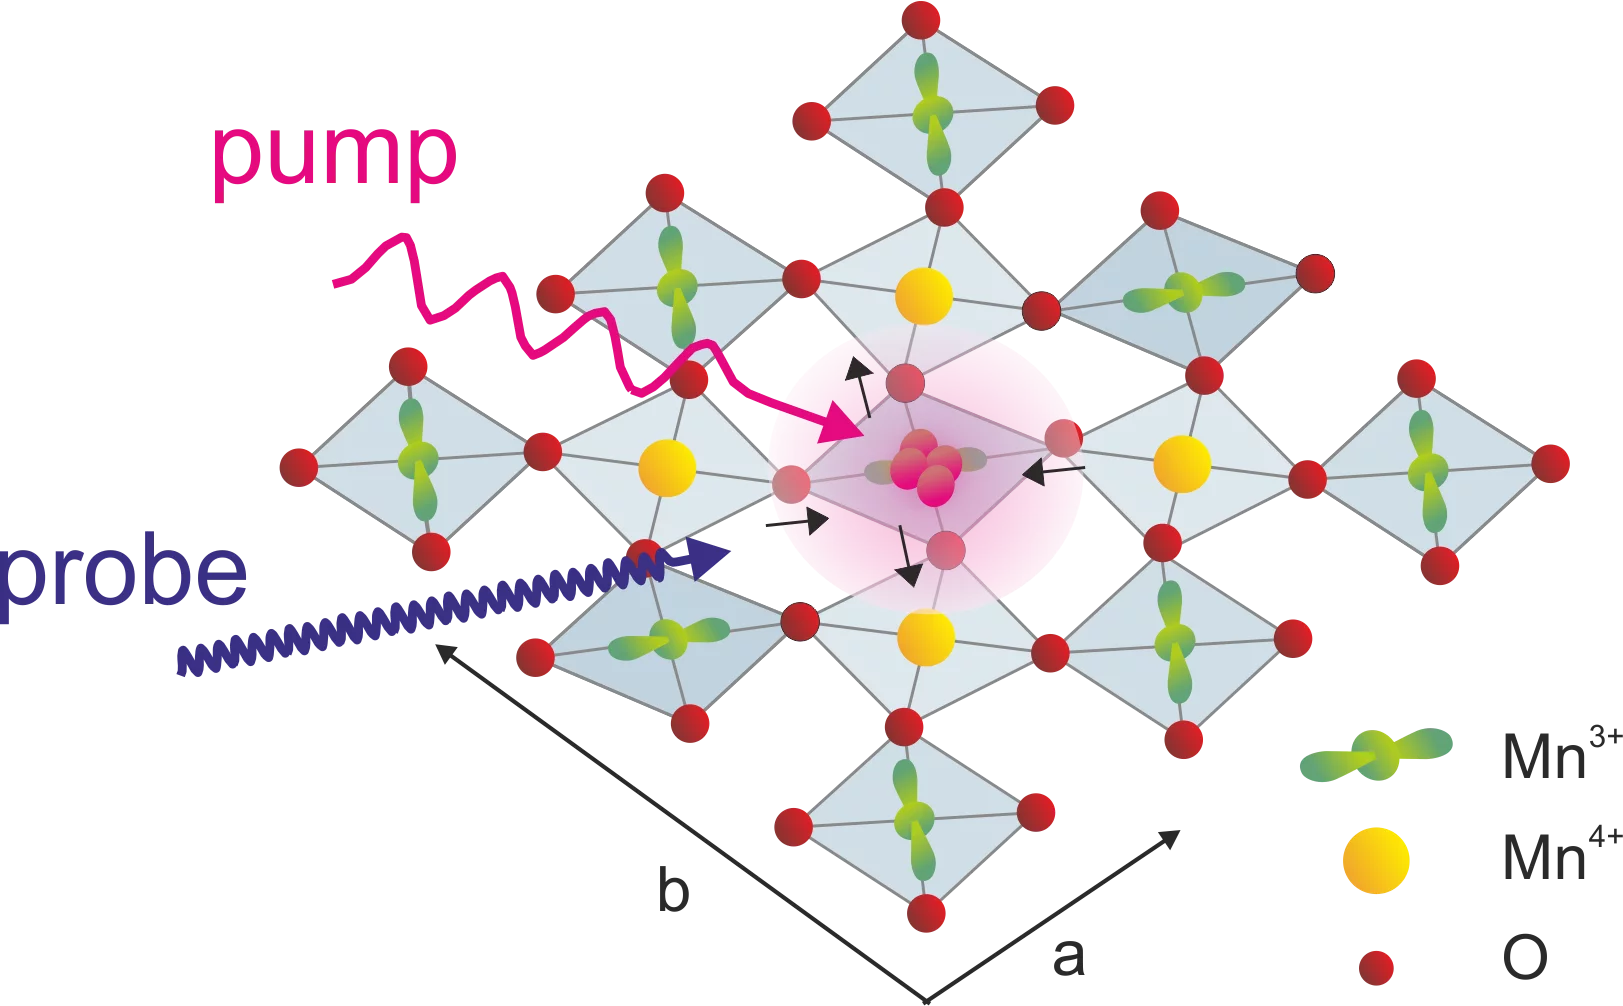 A time-dependent order parameter for ultrafast photoinduced phase transitions.